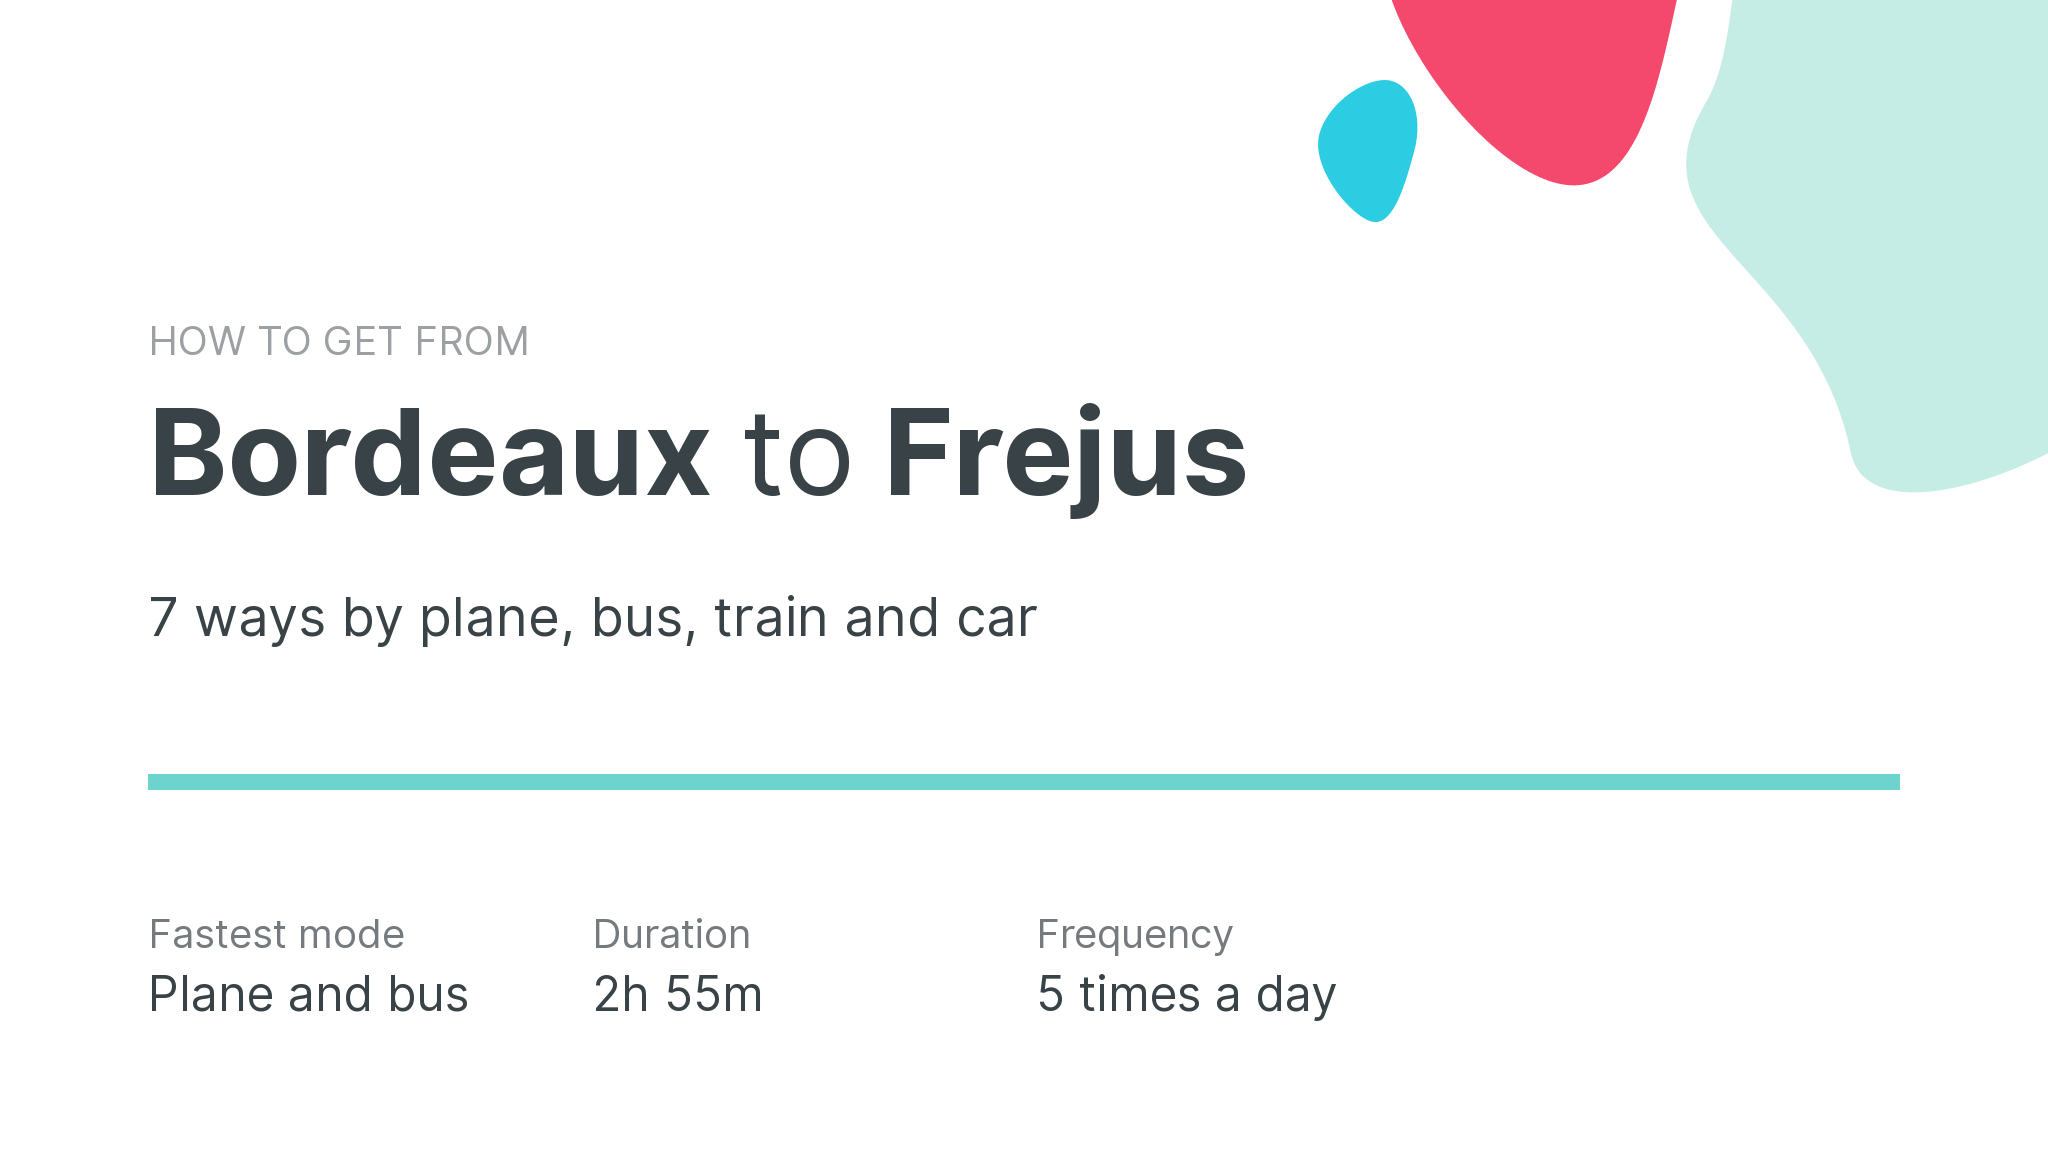 How do I get from Bordeaux to Frejus